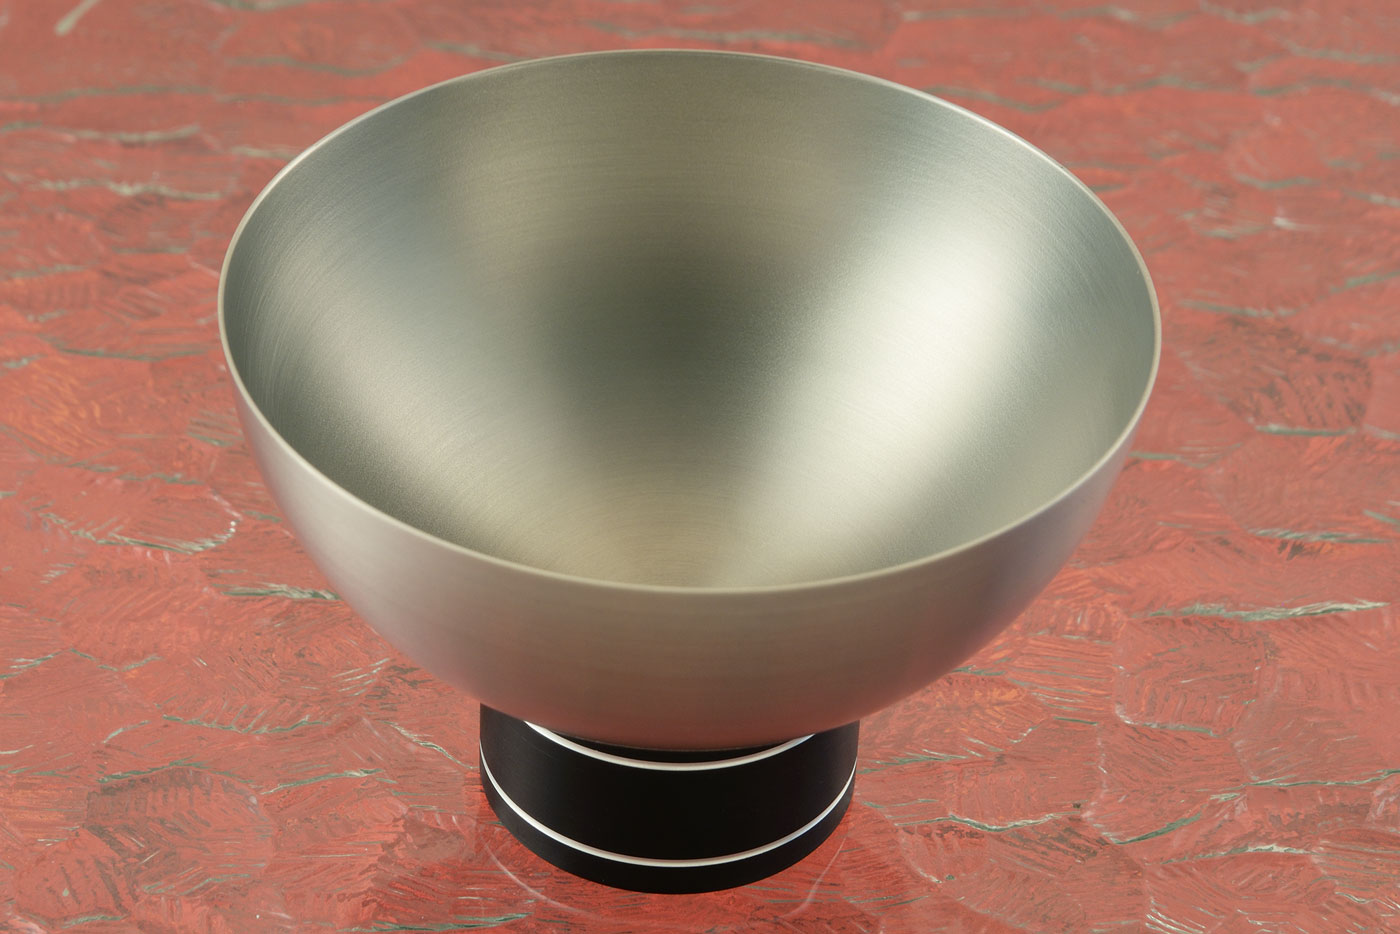 Shave Bowl -- Satin Finished Stainless Steel